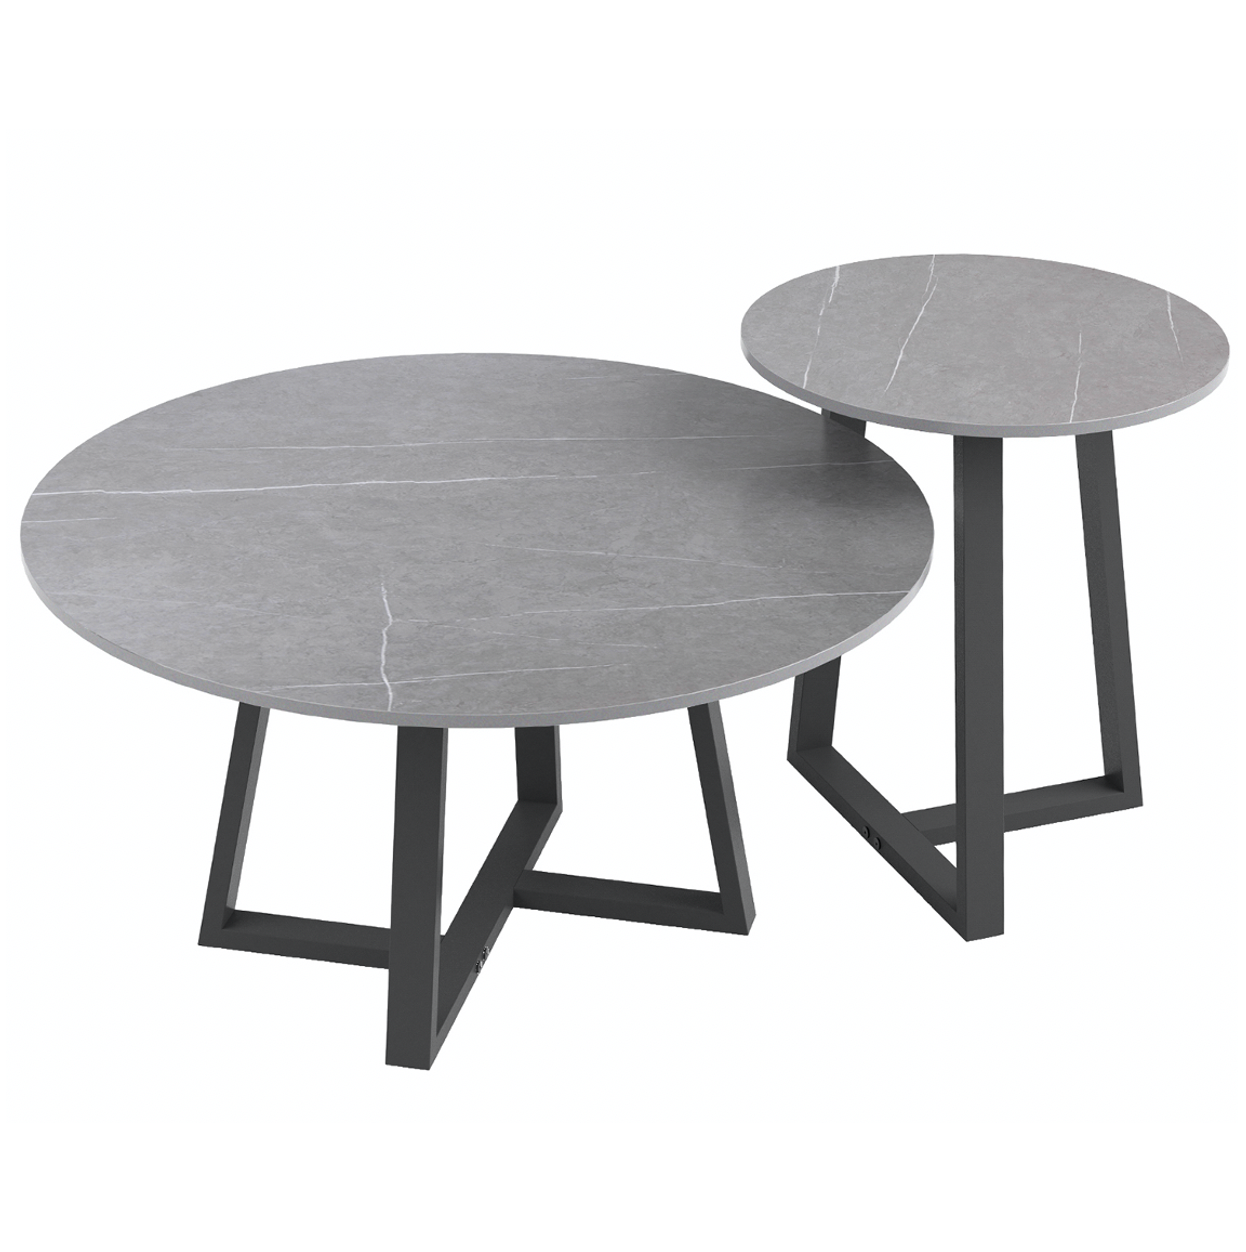 BROADWAY TWO TIER COFFEE TABLE SET - GREY STONE